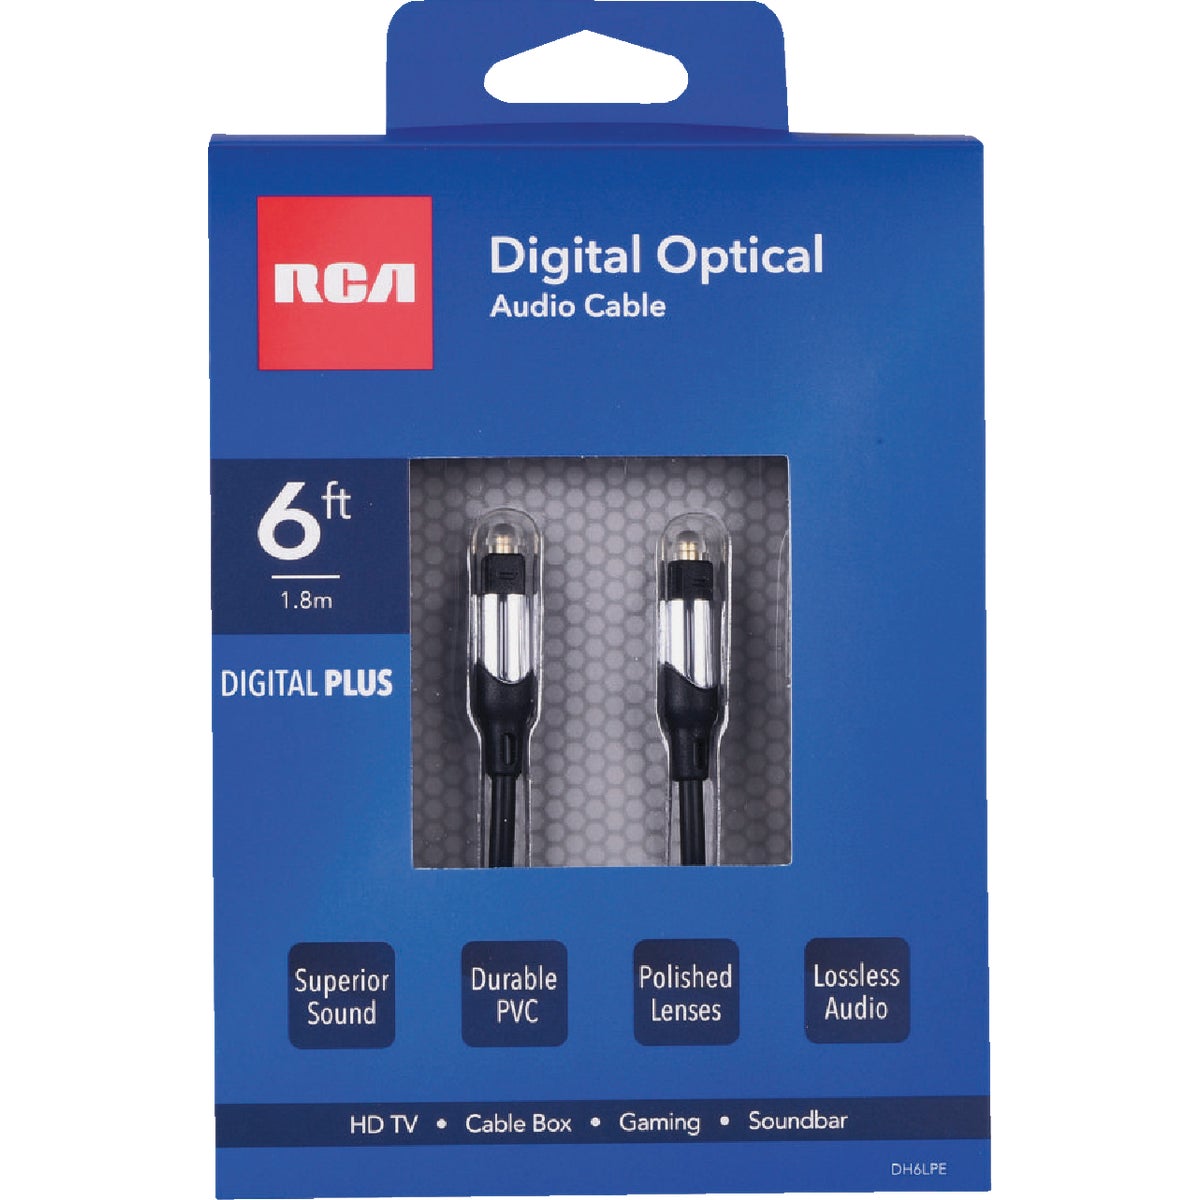 Item 531812, 6-foot Digital Plus optical audio cable is designed to support all digital 